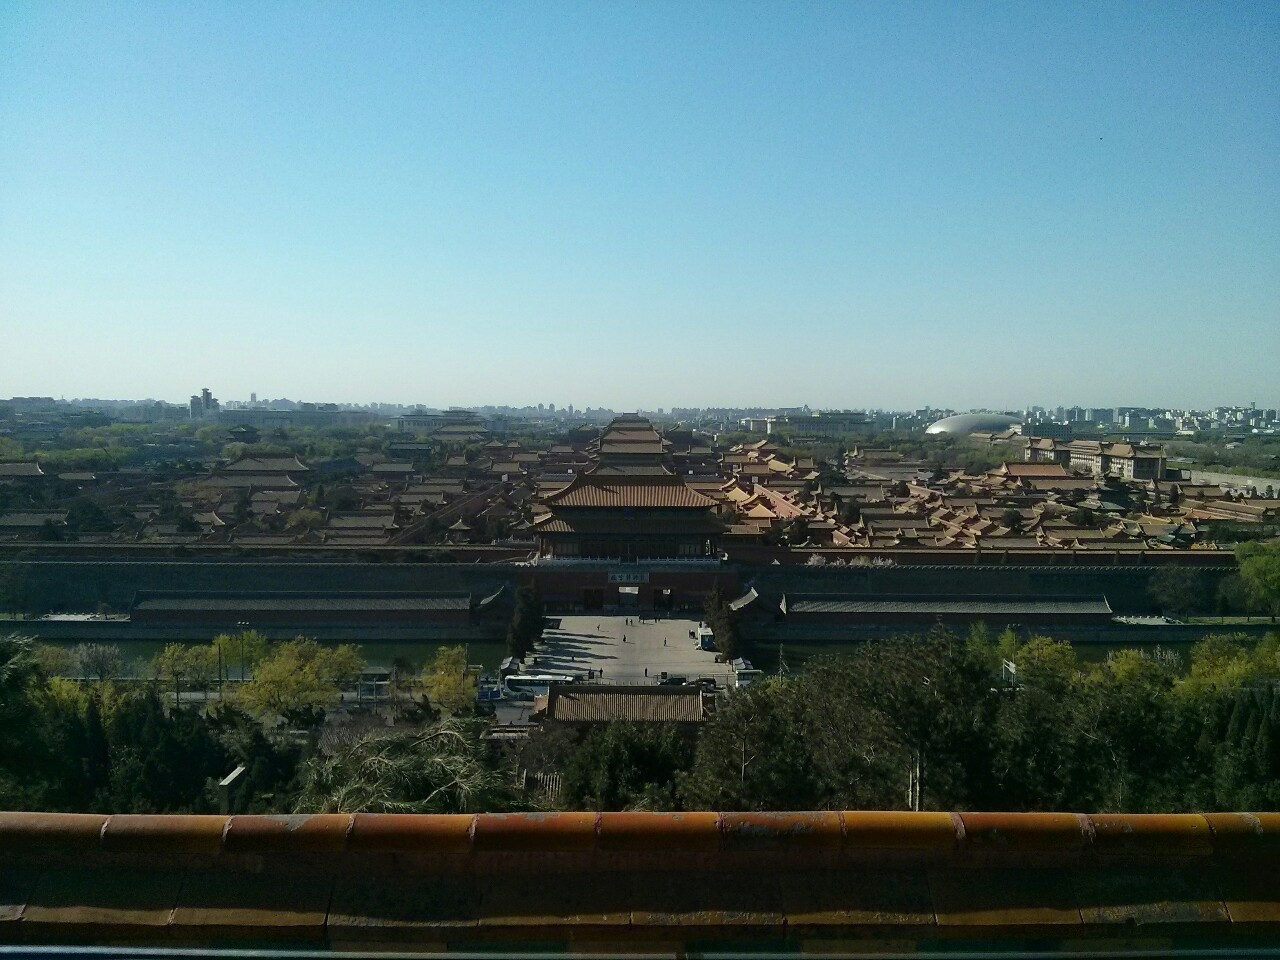 I’ve made it to Beijing and will be here for five nights. It’s fairly easy to navigate on the subway and there are definitely a lot of areas to explore. This is the view of the Forbidden Palace from Jingshan Park.